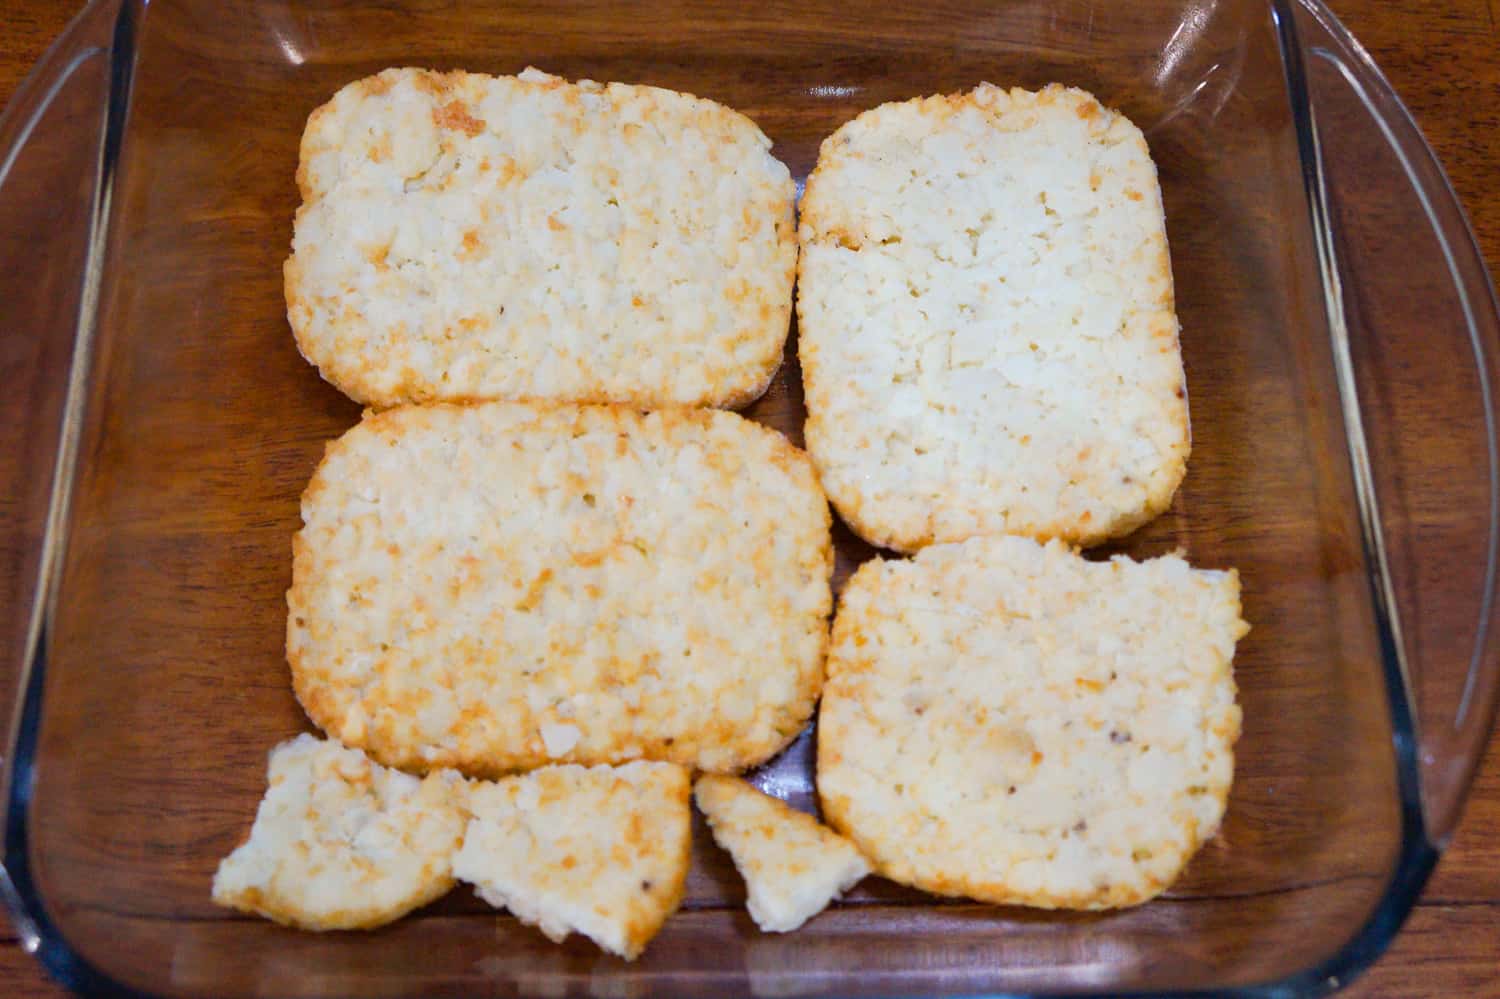 frozen hash brown patties in the bottom of a baking dish